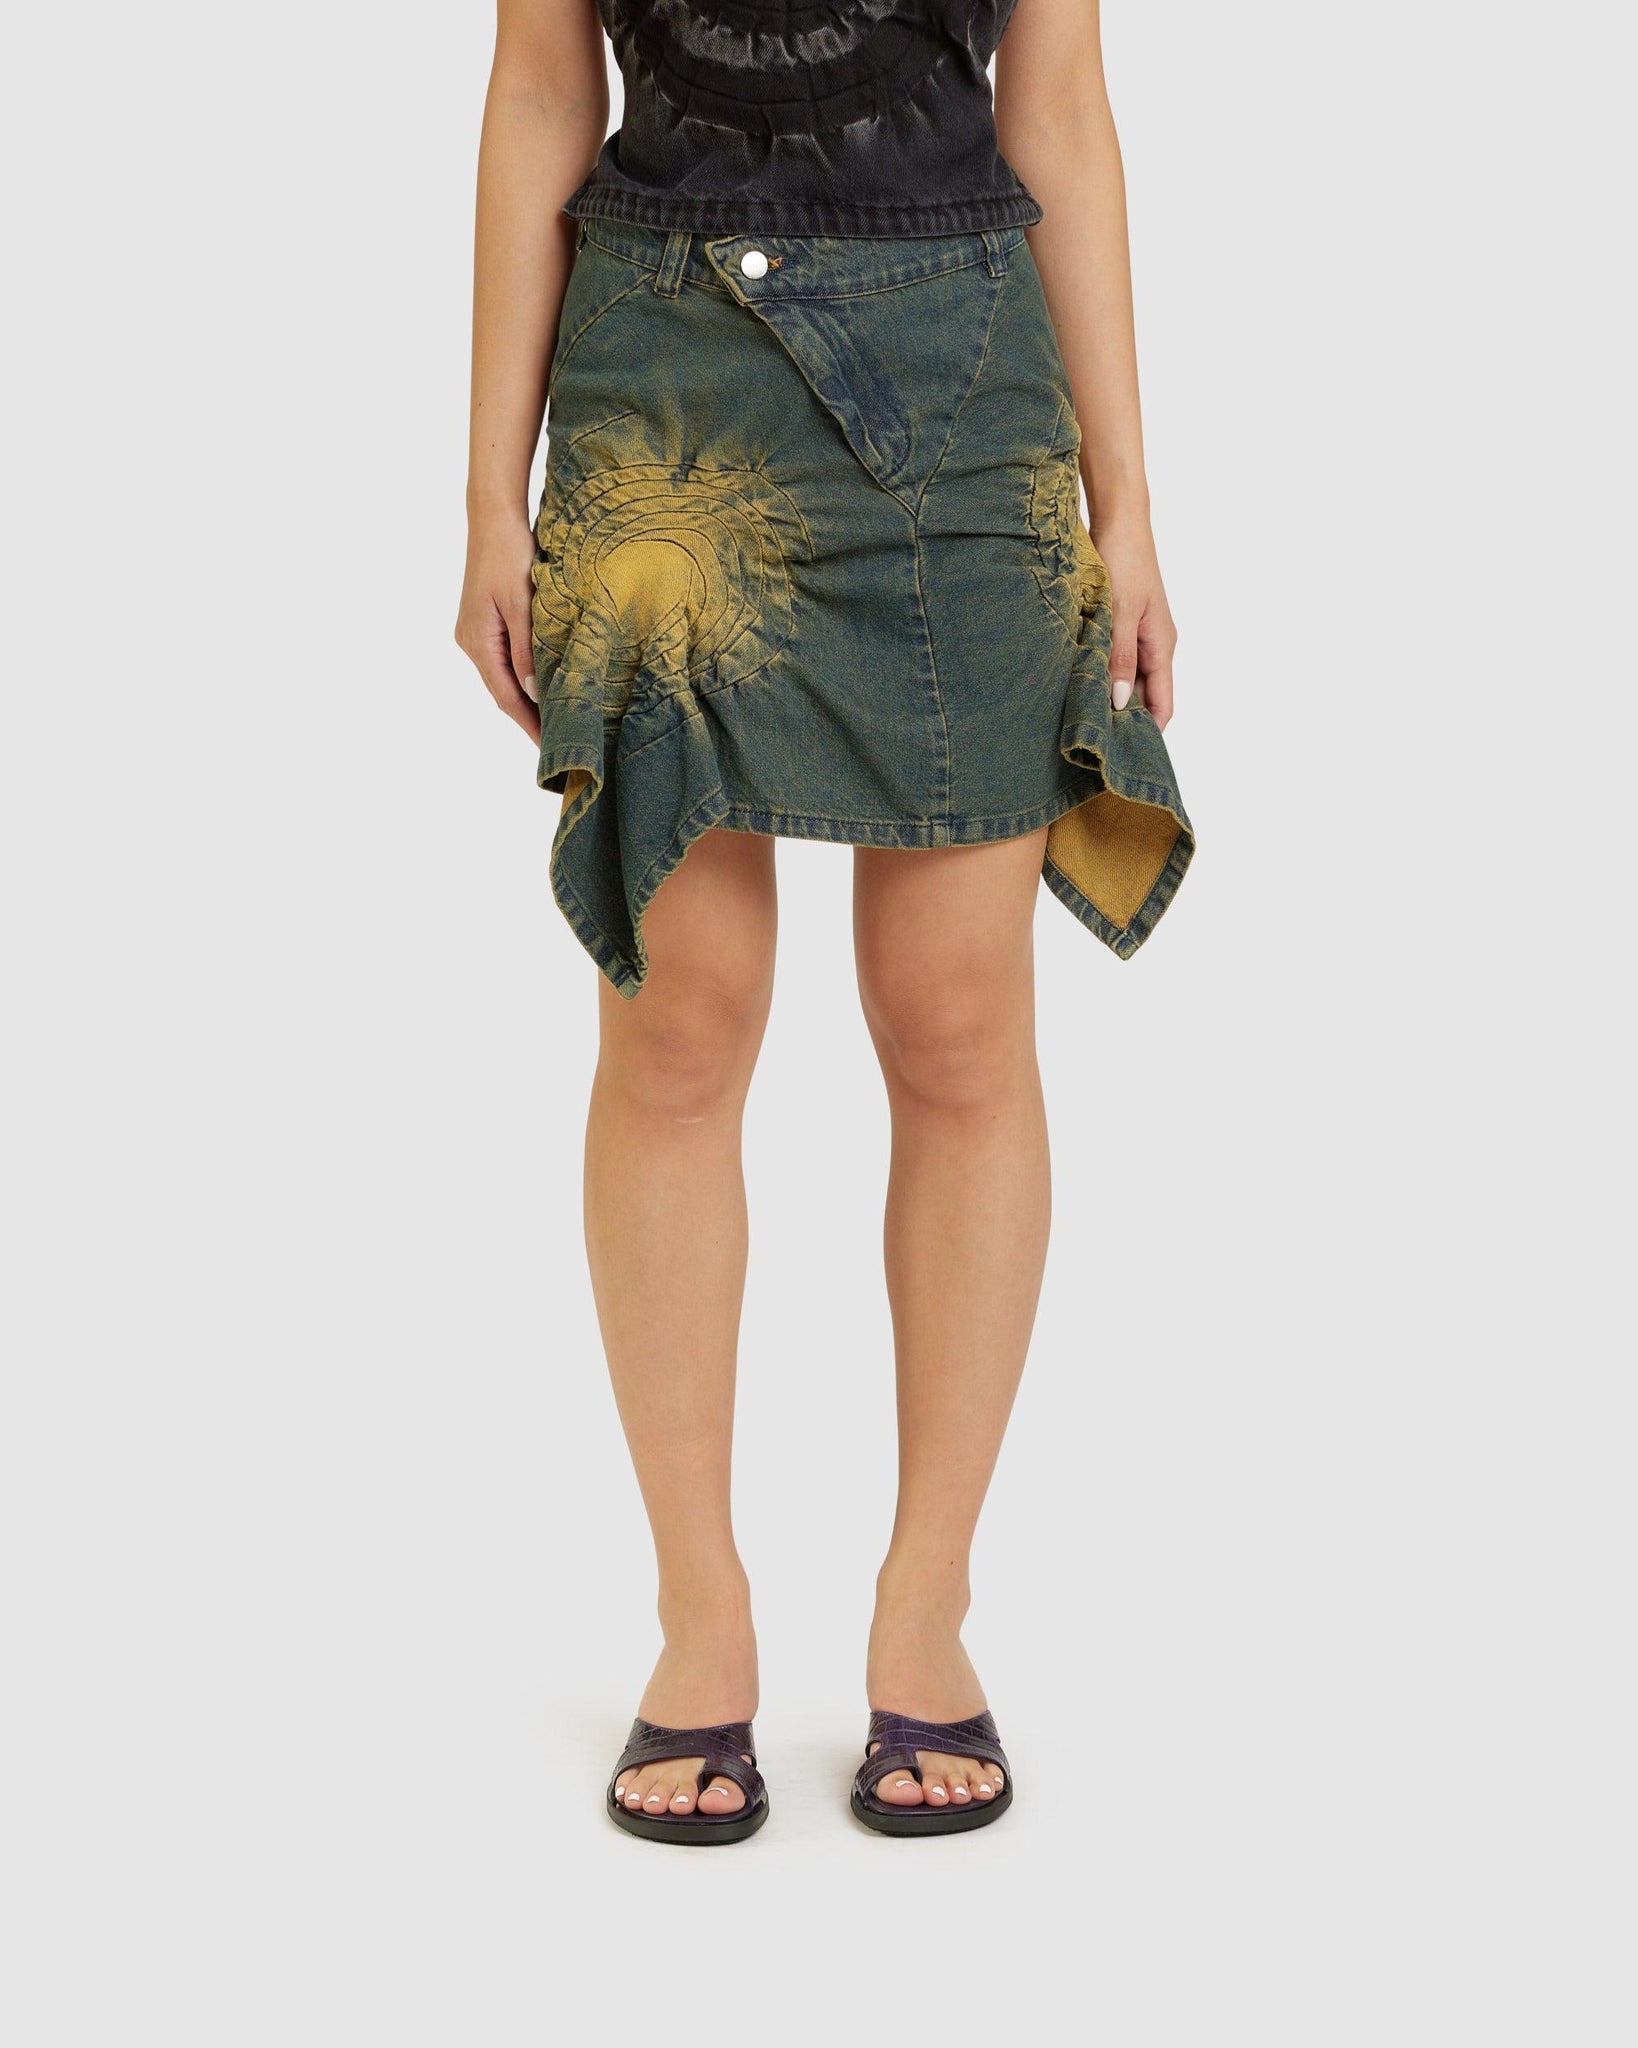 Drift Skirt - {{ collection.title }} - Chinatown Country Club 